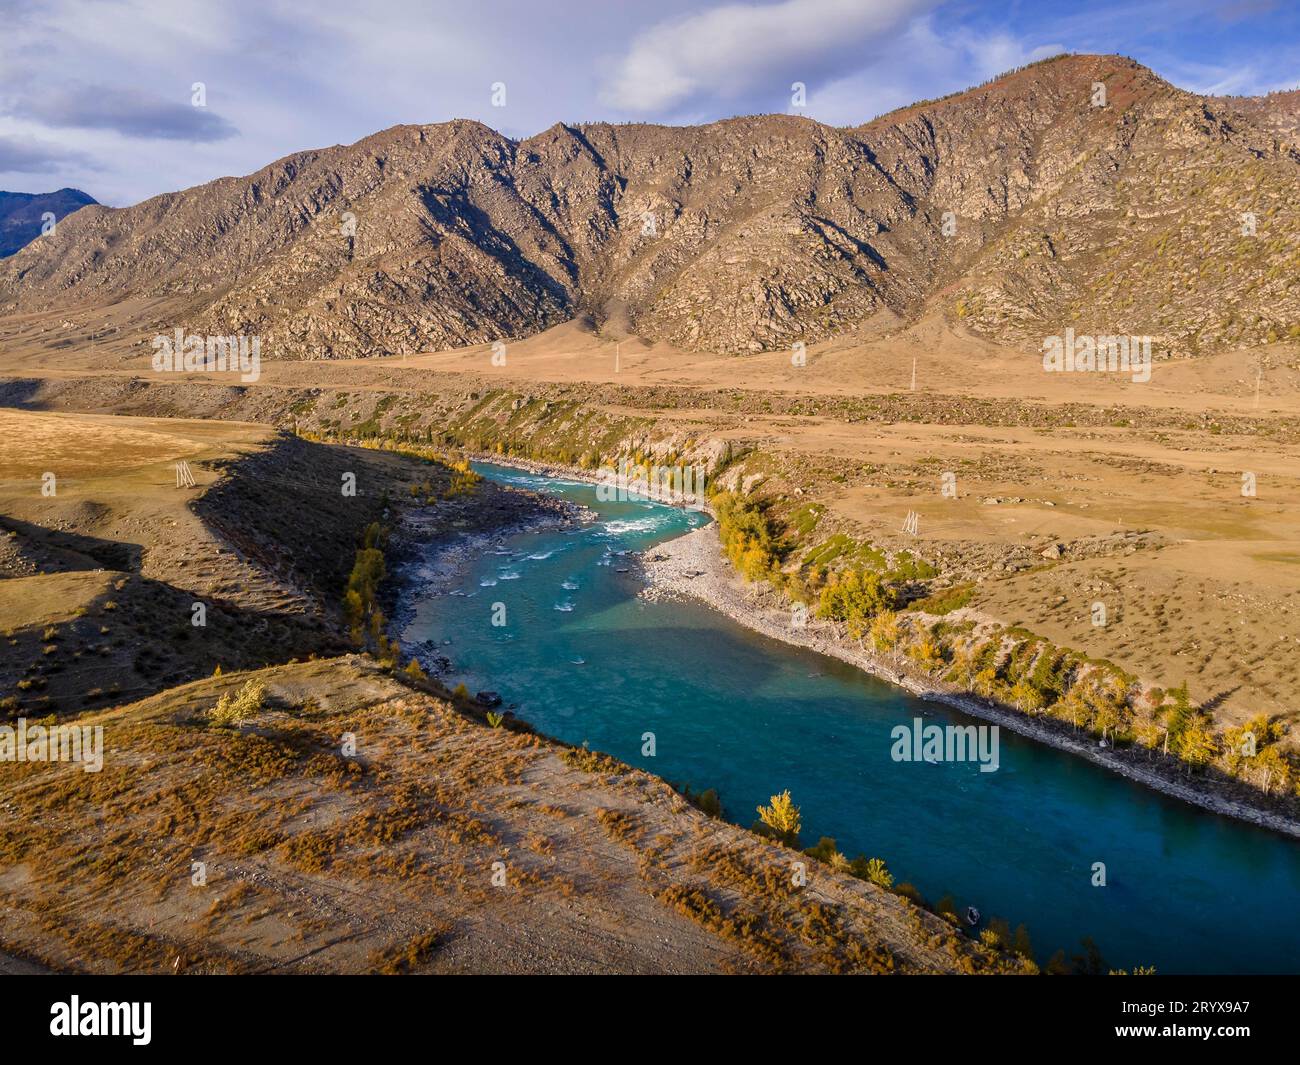 The aerial picture of the scenic Katun river in the Altai Mountains in Siberia, Russia. Stock Photo